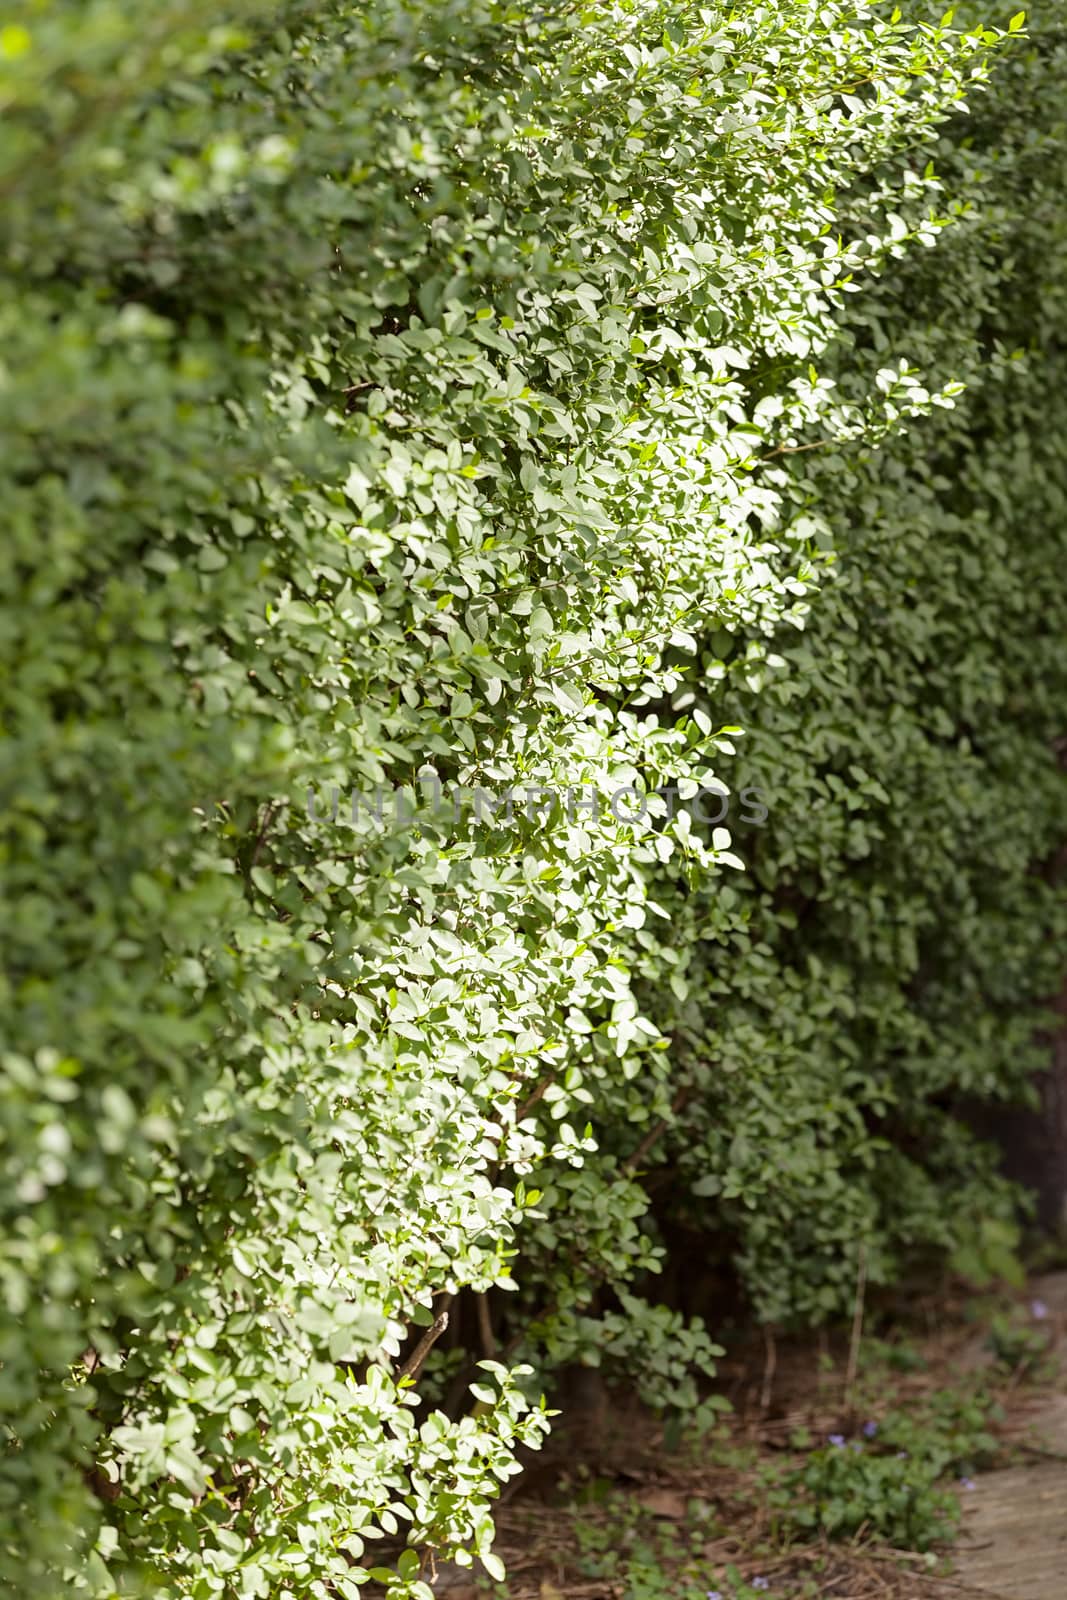 evergreen hedges in the parks, note shallow depth of field